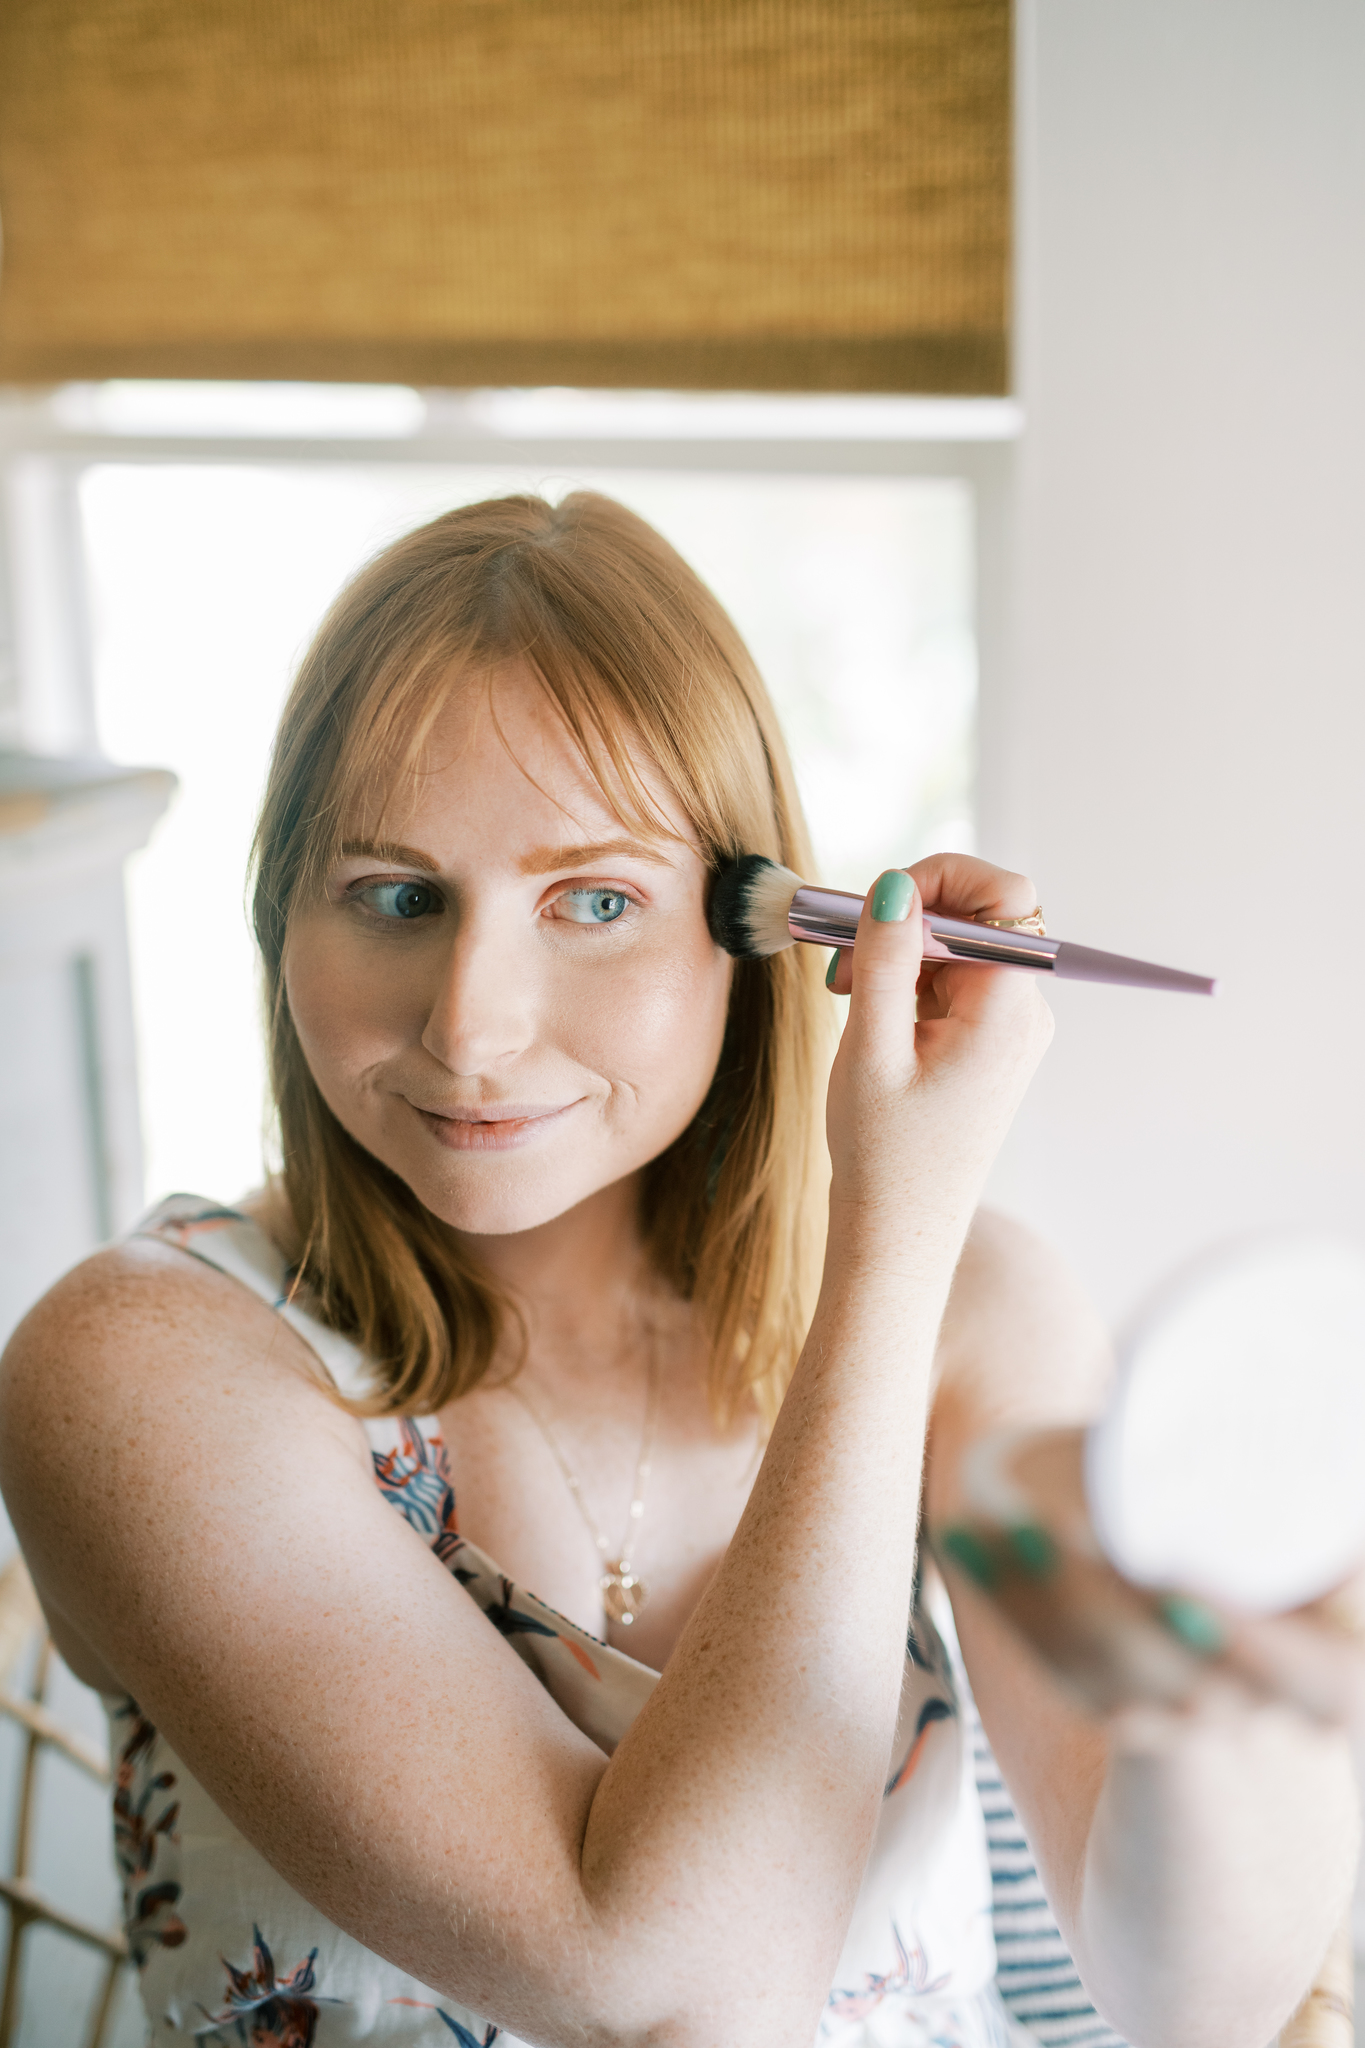 Amanda Burrows, of Affordable by Amanda, applies Milk Makeup Flex Highlighter to the top of her cheekbone for a glistening highlight. She uses the Lit shade of Milk Makeup on her cheeks for added highlight and shine for the summertime. 